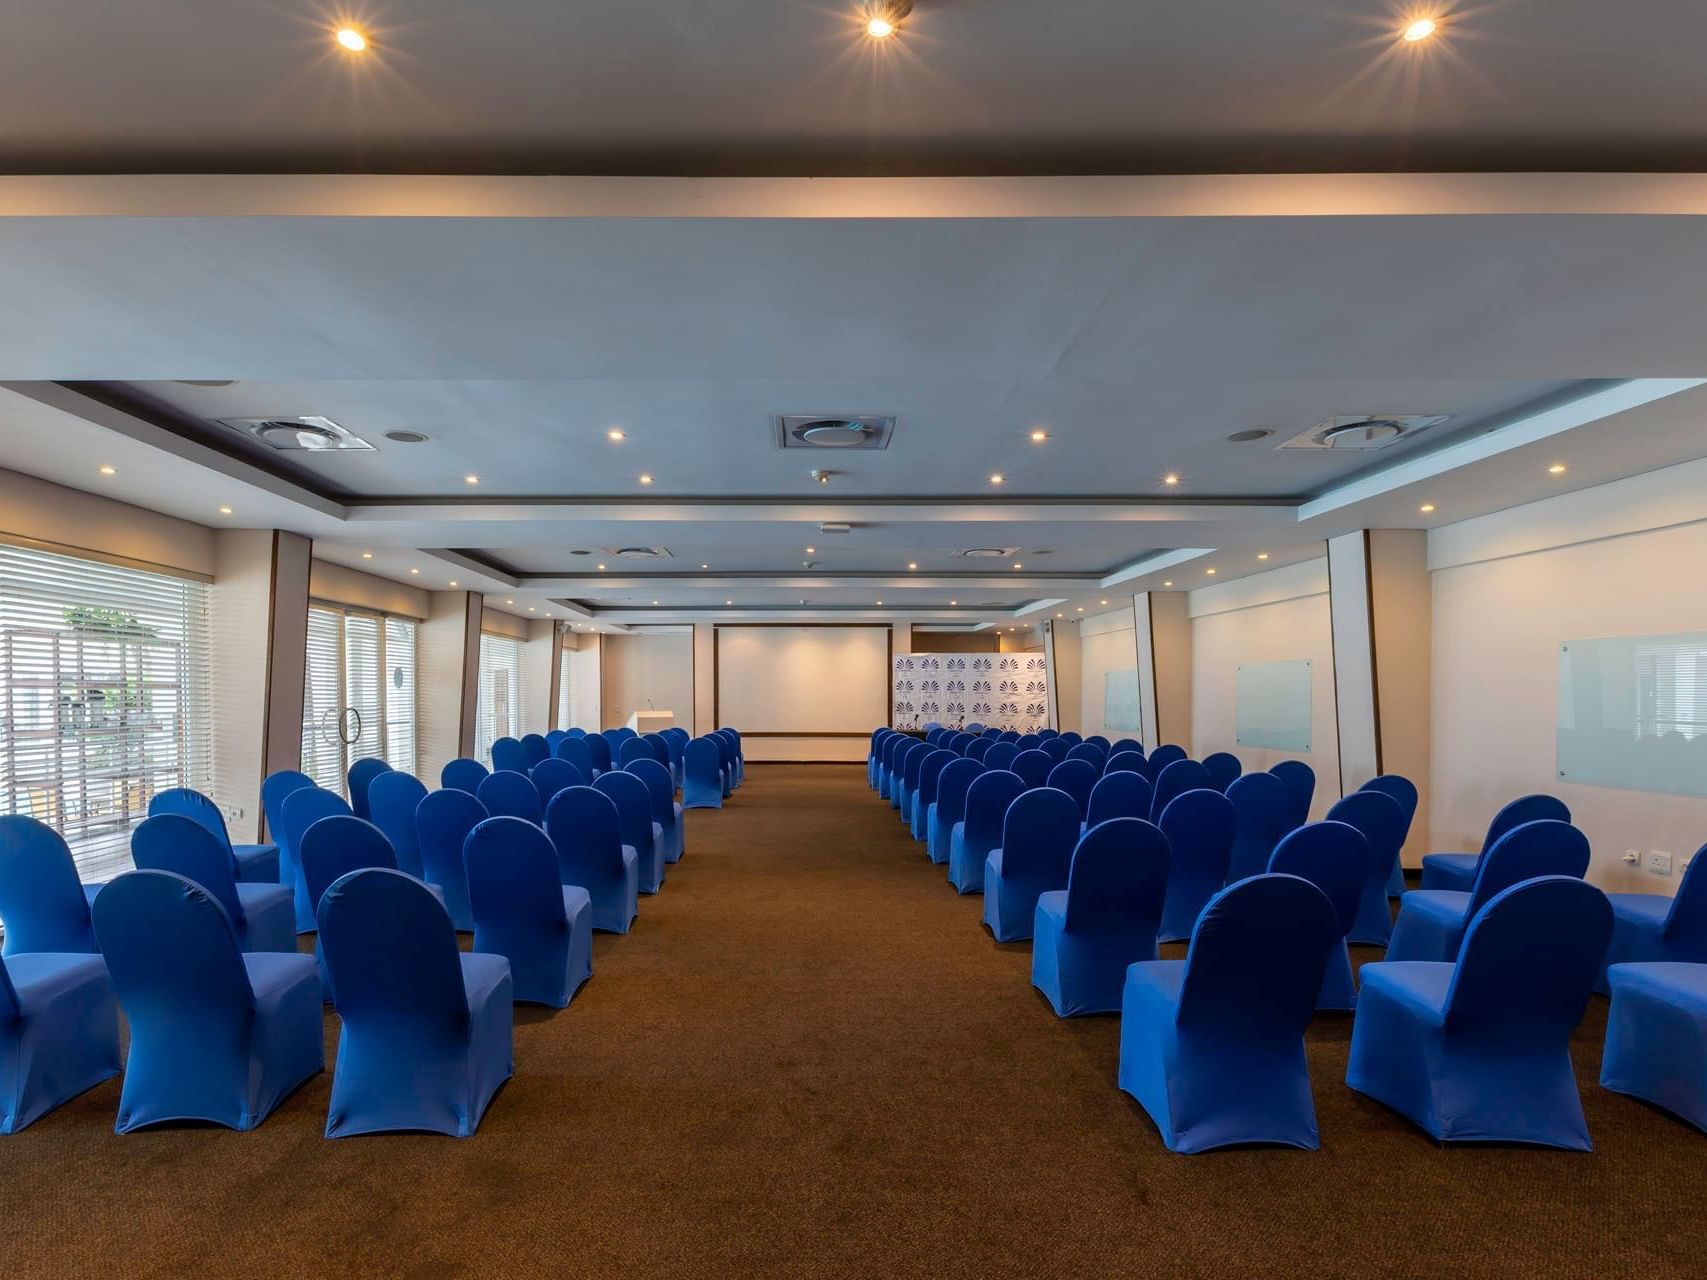 Theatre arrangement in a meeting room at Cardoso Hotel